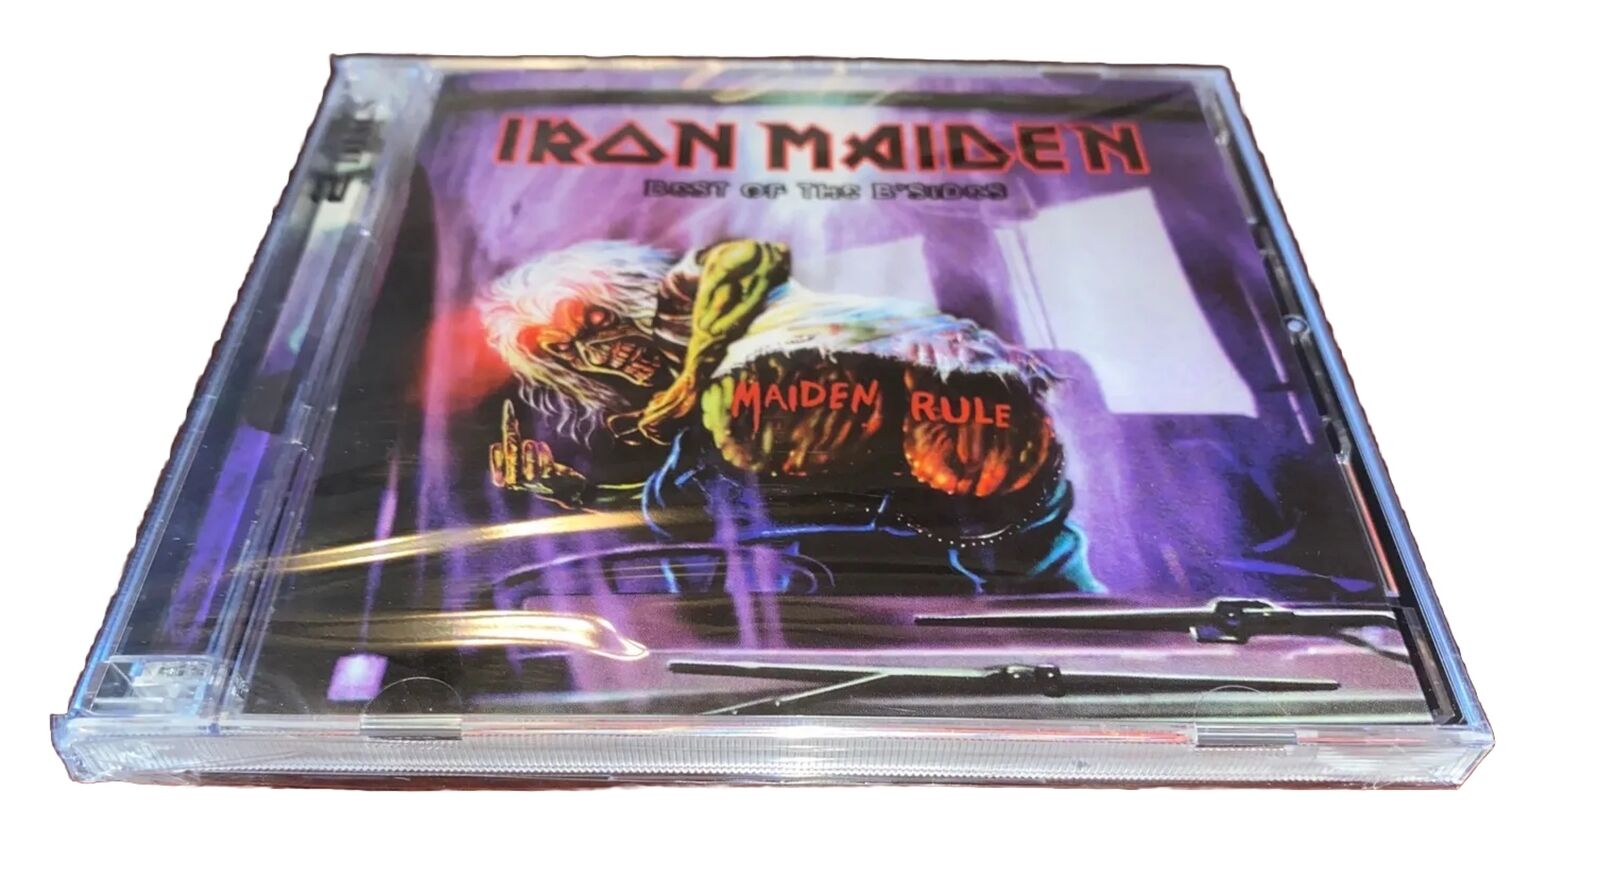 IRON MAIDEN - Best Of The B'Sides 2-CD RARE & OOP (Nov 2002) IRON MAIDEN B SIDES